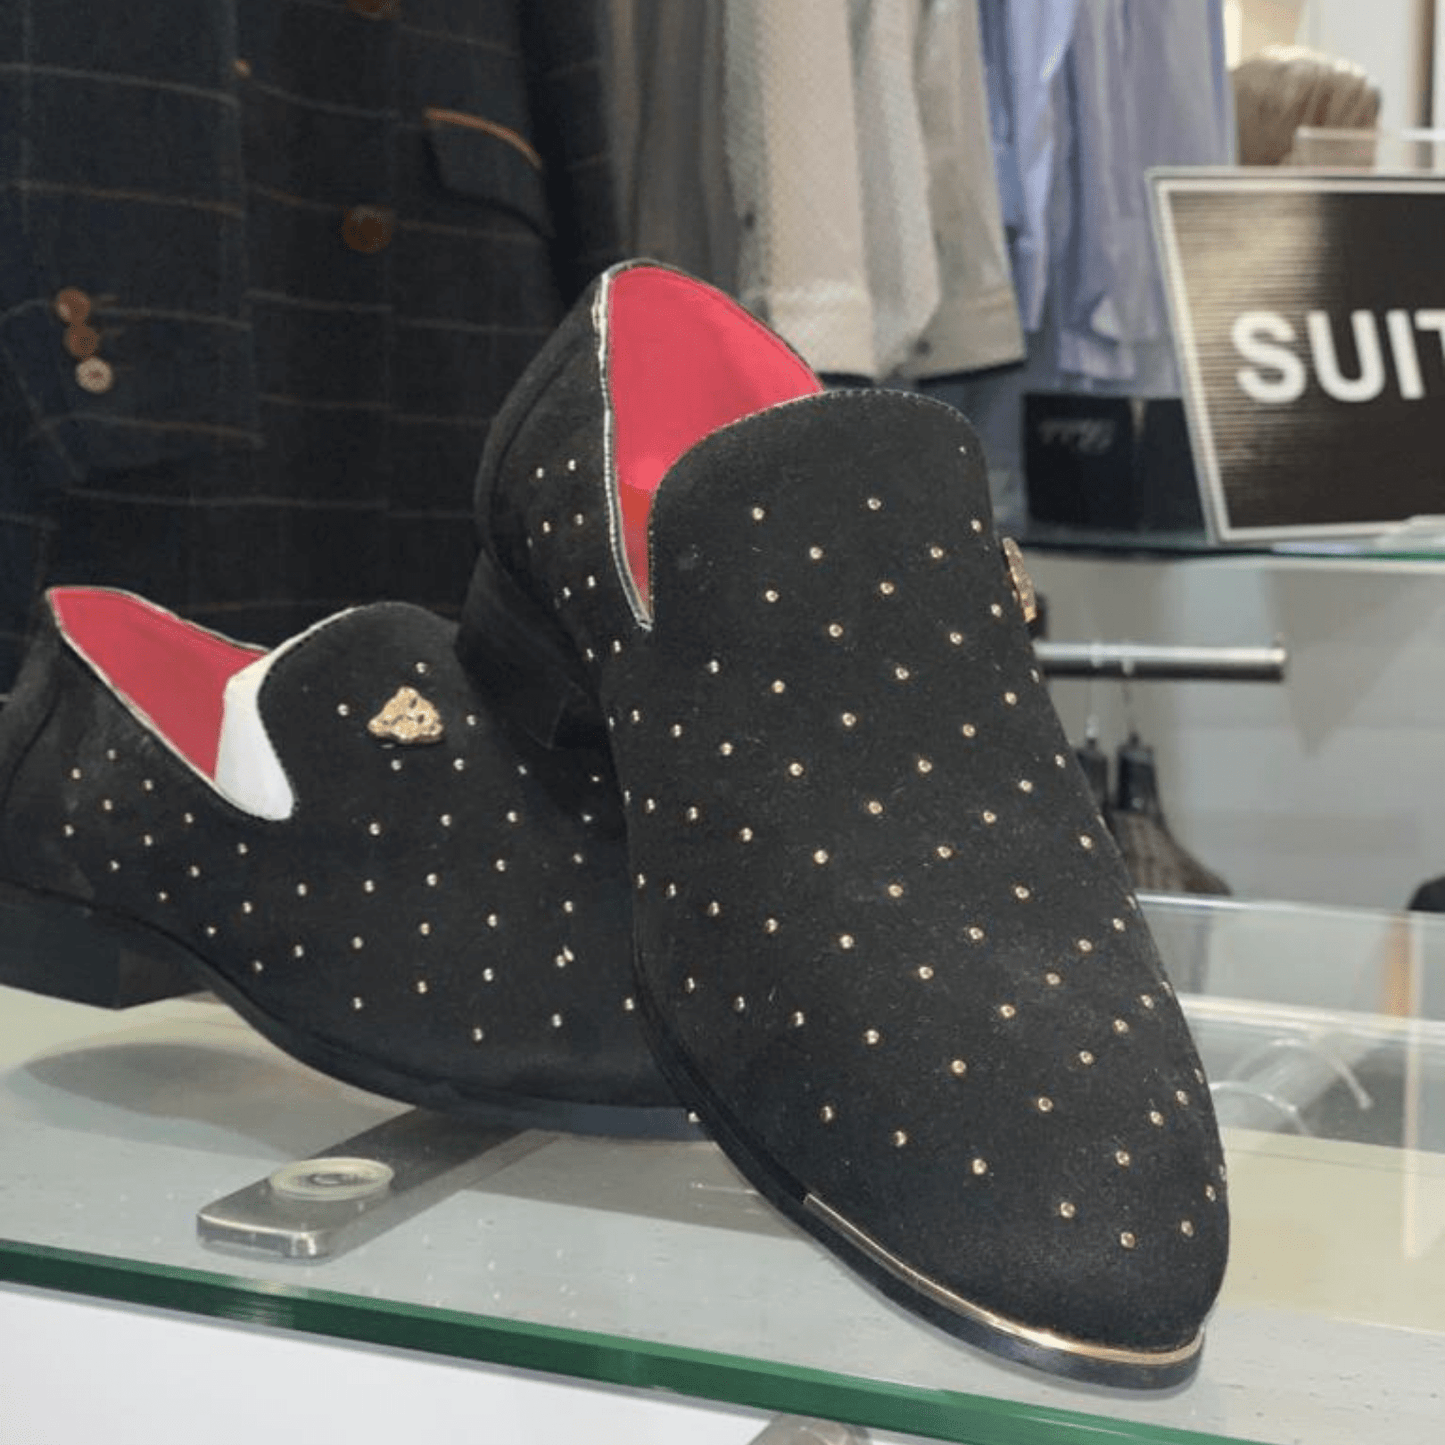 Mens Studded slipper like shoes, Gold and red inserts